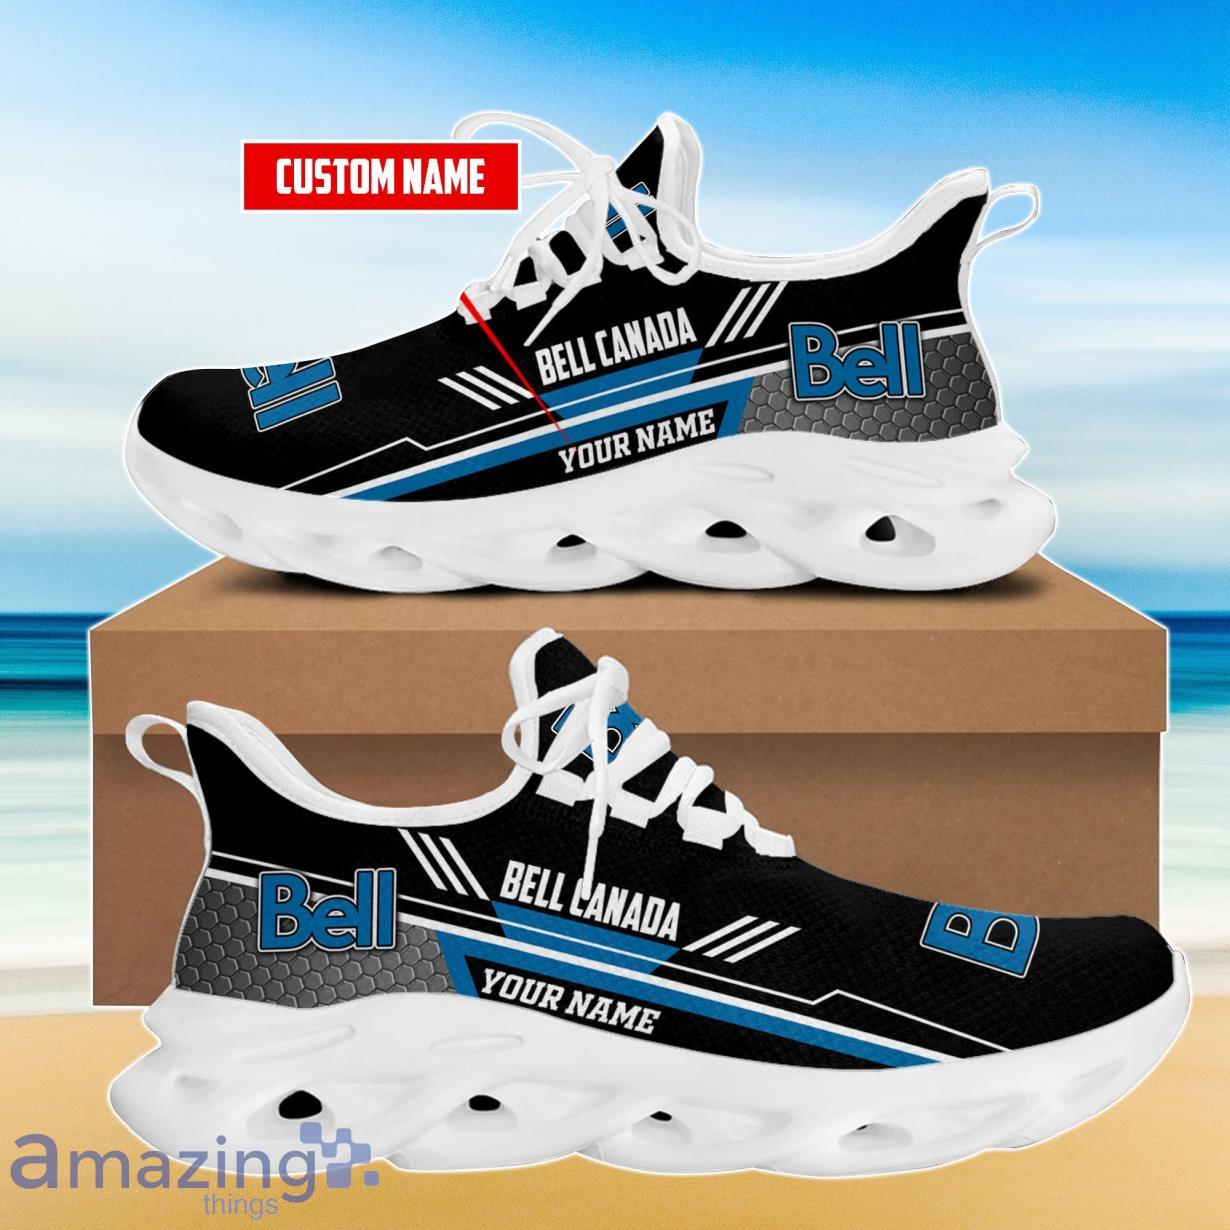 Bell Canada Max Soul Shoes Custom Name Product Photo 2